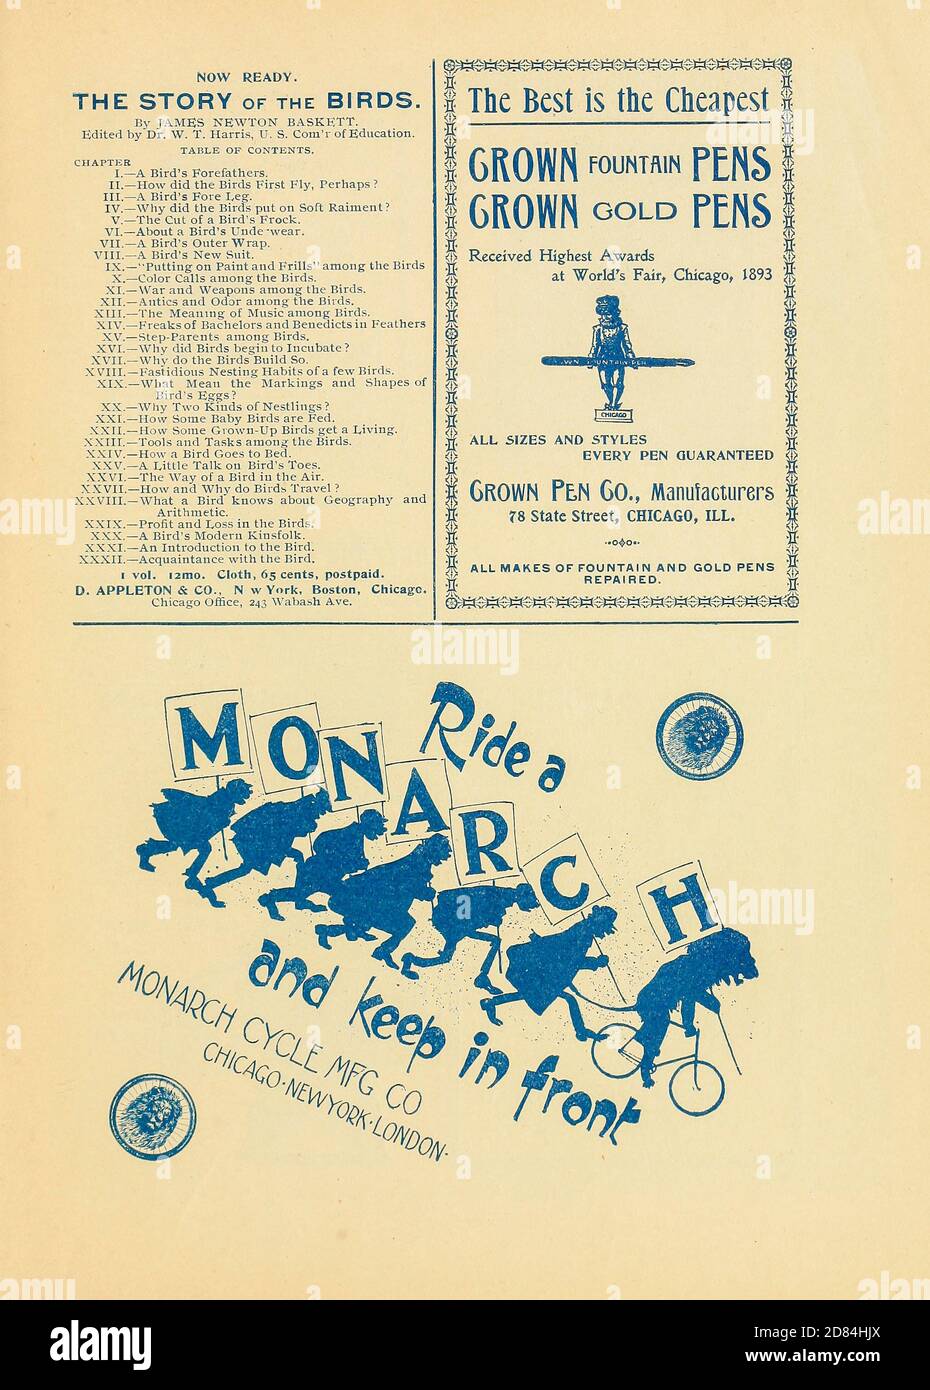 Ride a Monarch Ad by the Monarch cycling Mfg Co. Appeared in a monthly magazine called 'Birds : illustrated by color photography' a monthly serial. Knowledge of Bird-life in 1897. Stock Photo